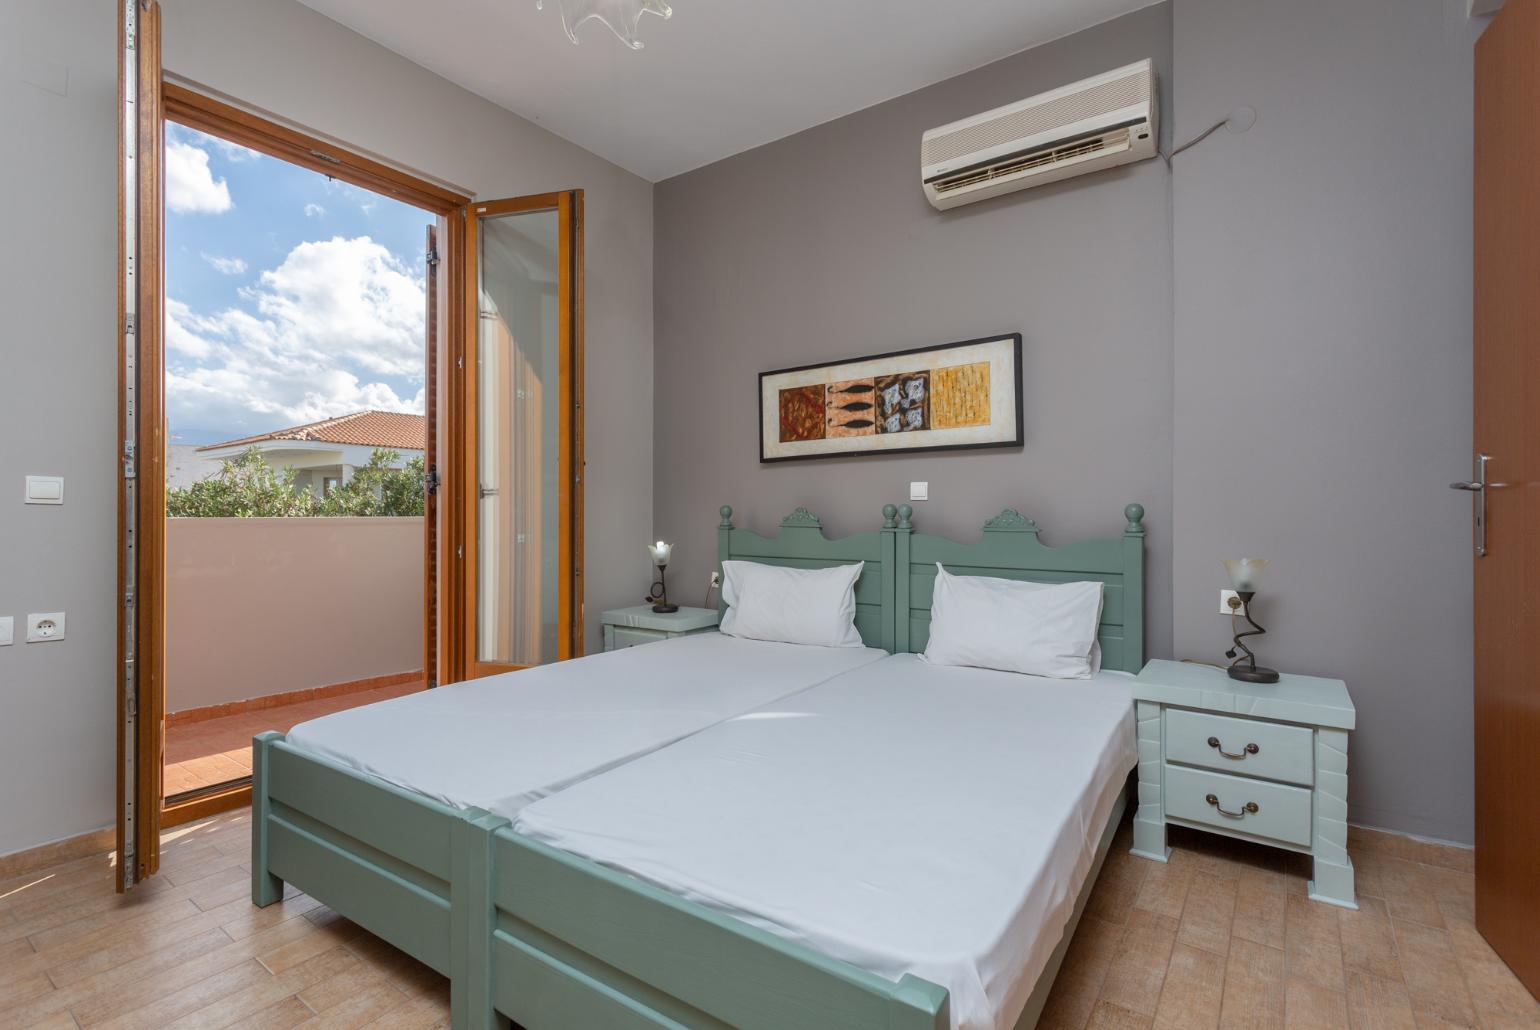 Twin bedroom with A/C and balcony access